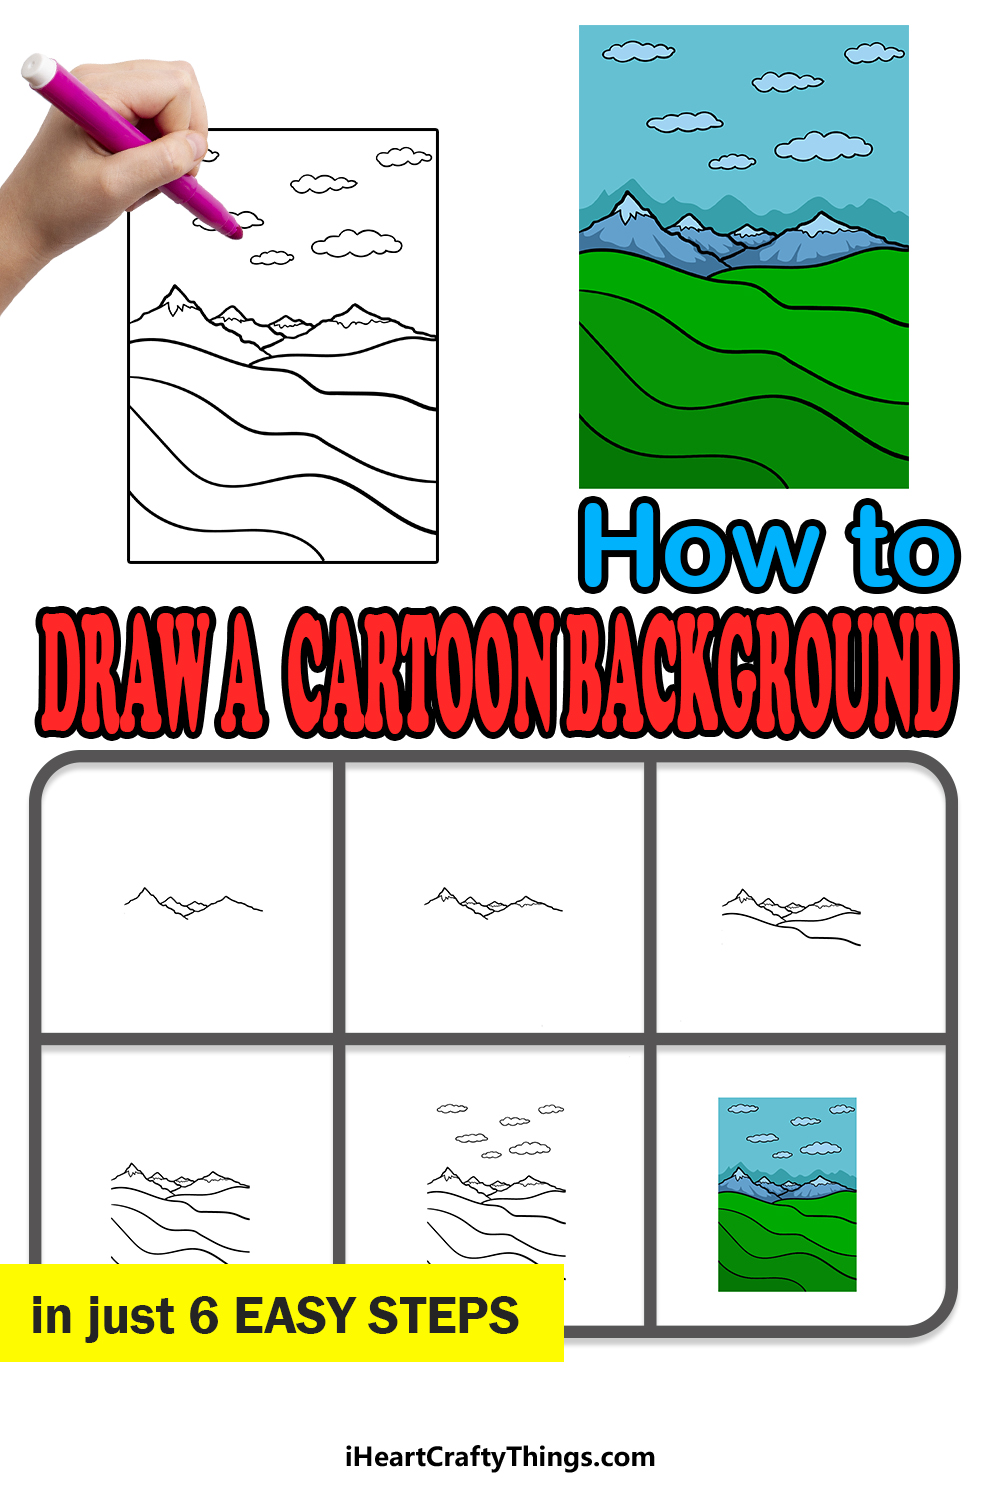 how to draw a cartoon background in 6 easy steps